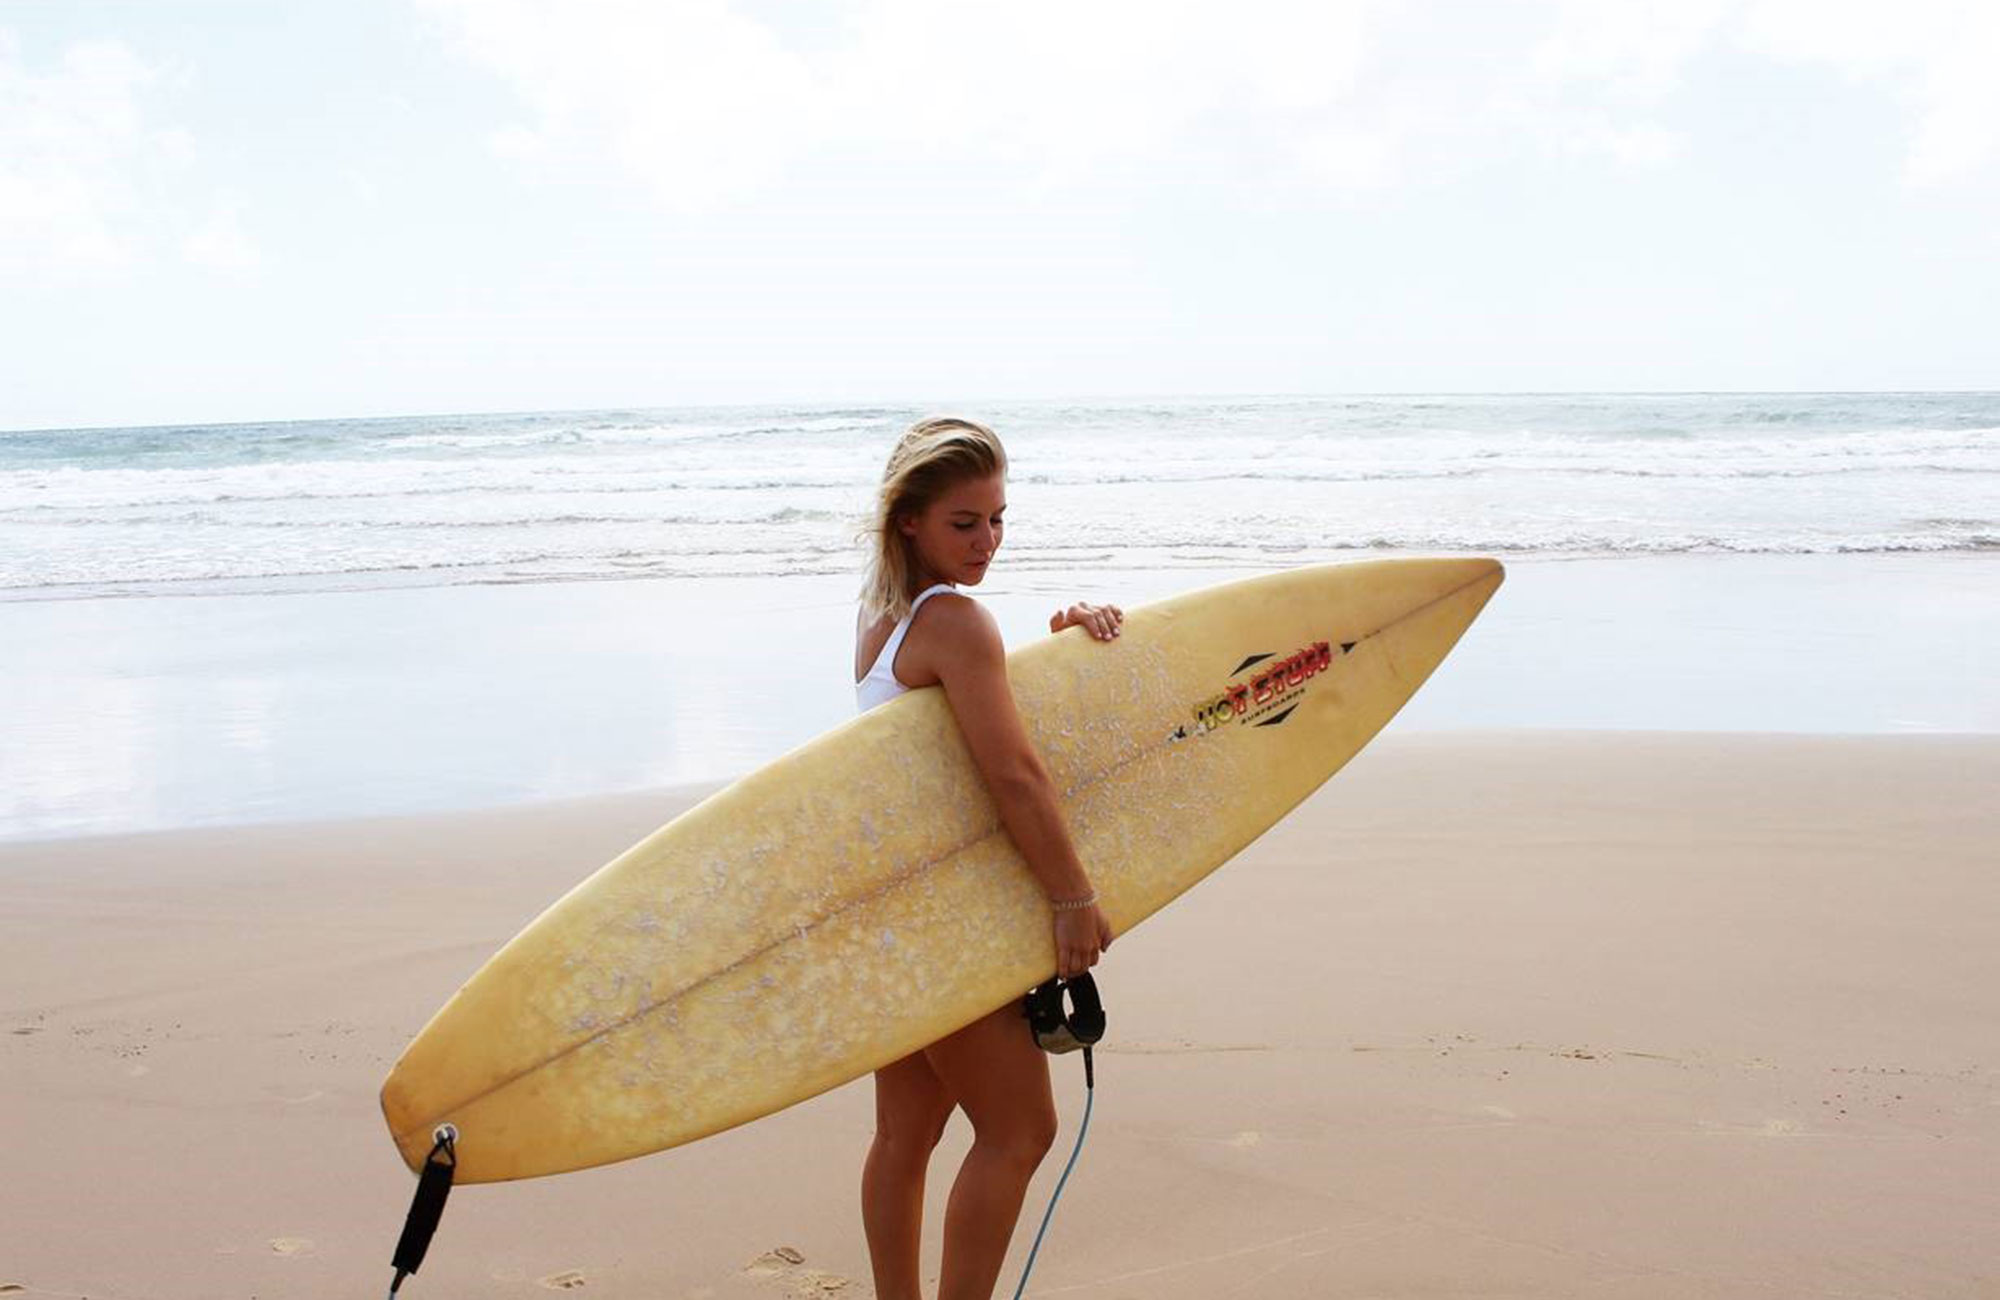 malin is a student in australia and surfs after school